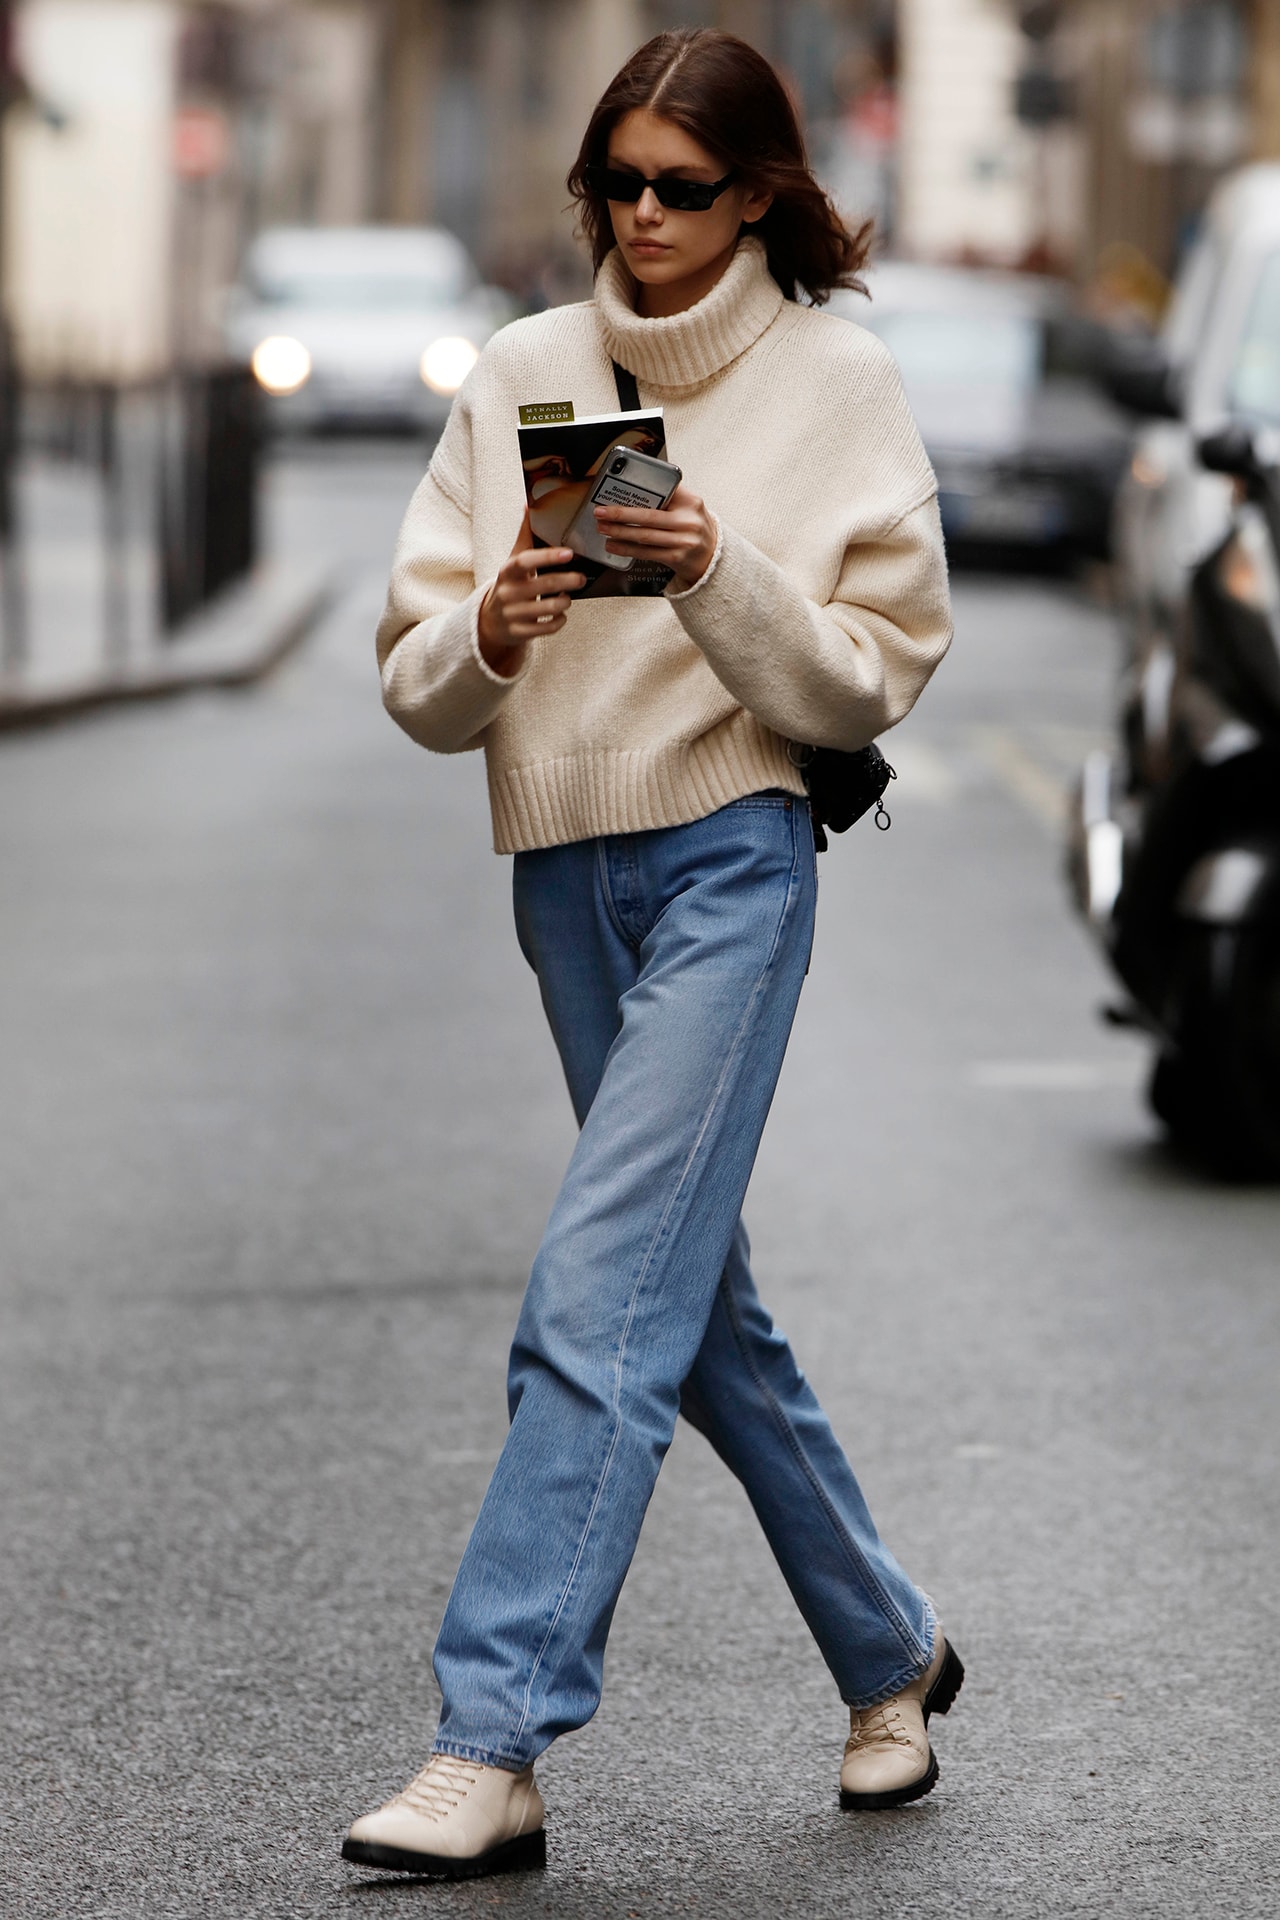 Trend: The Mom Jeans are back from the 90's